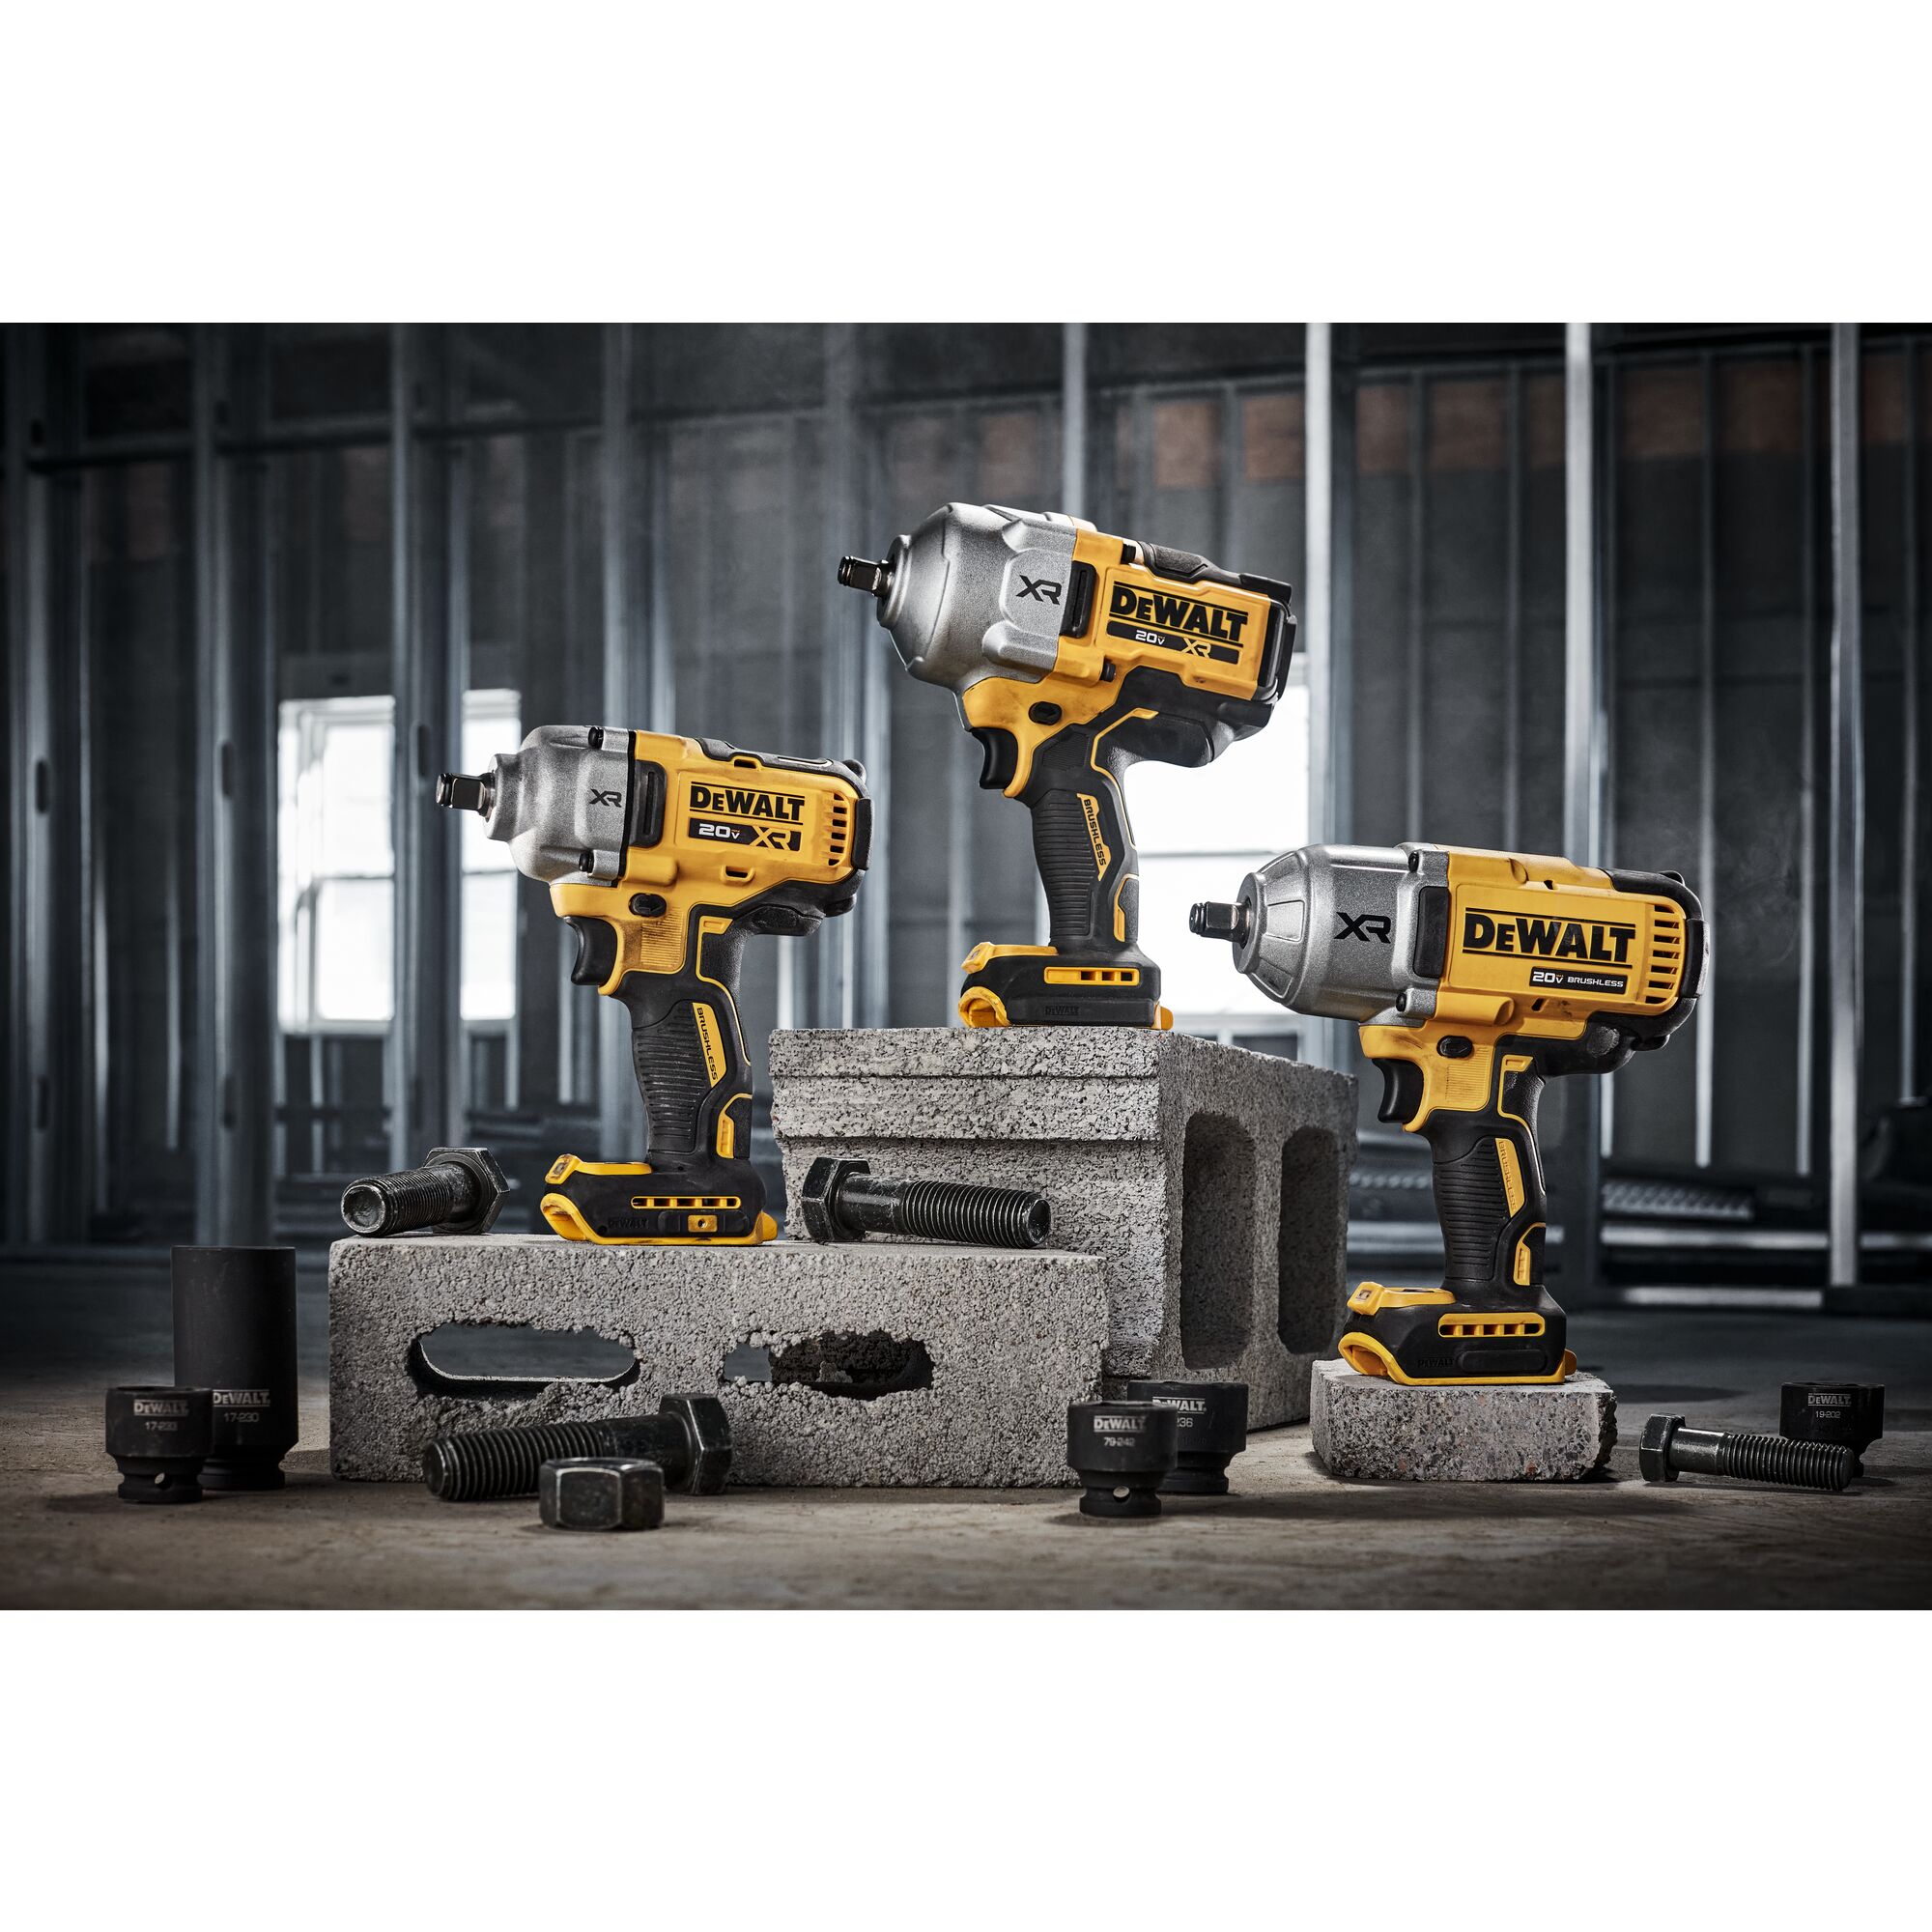 DEWALT XR Variable Speed Brushless 1/2-in Drive Cordless Impact